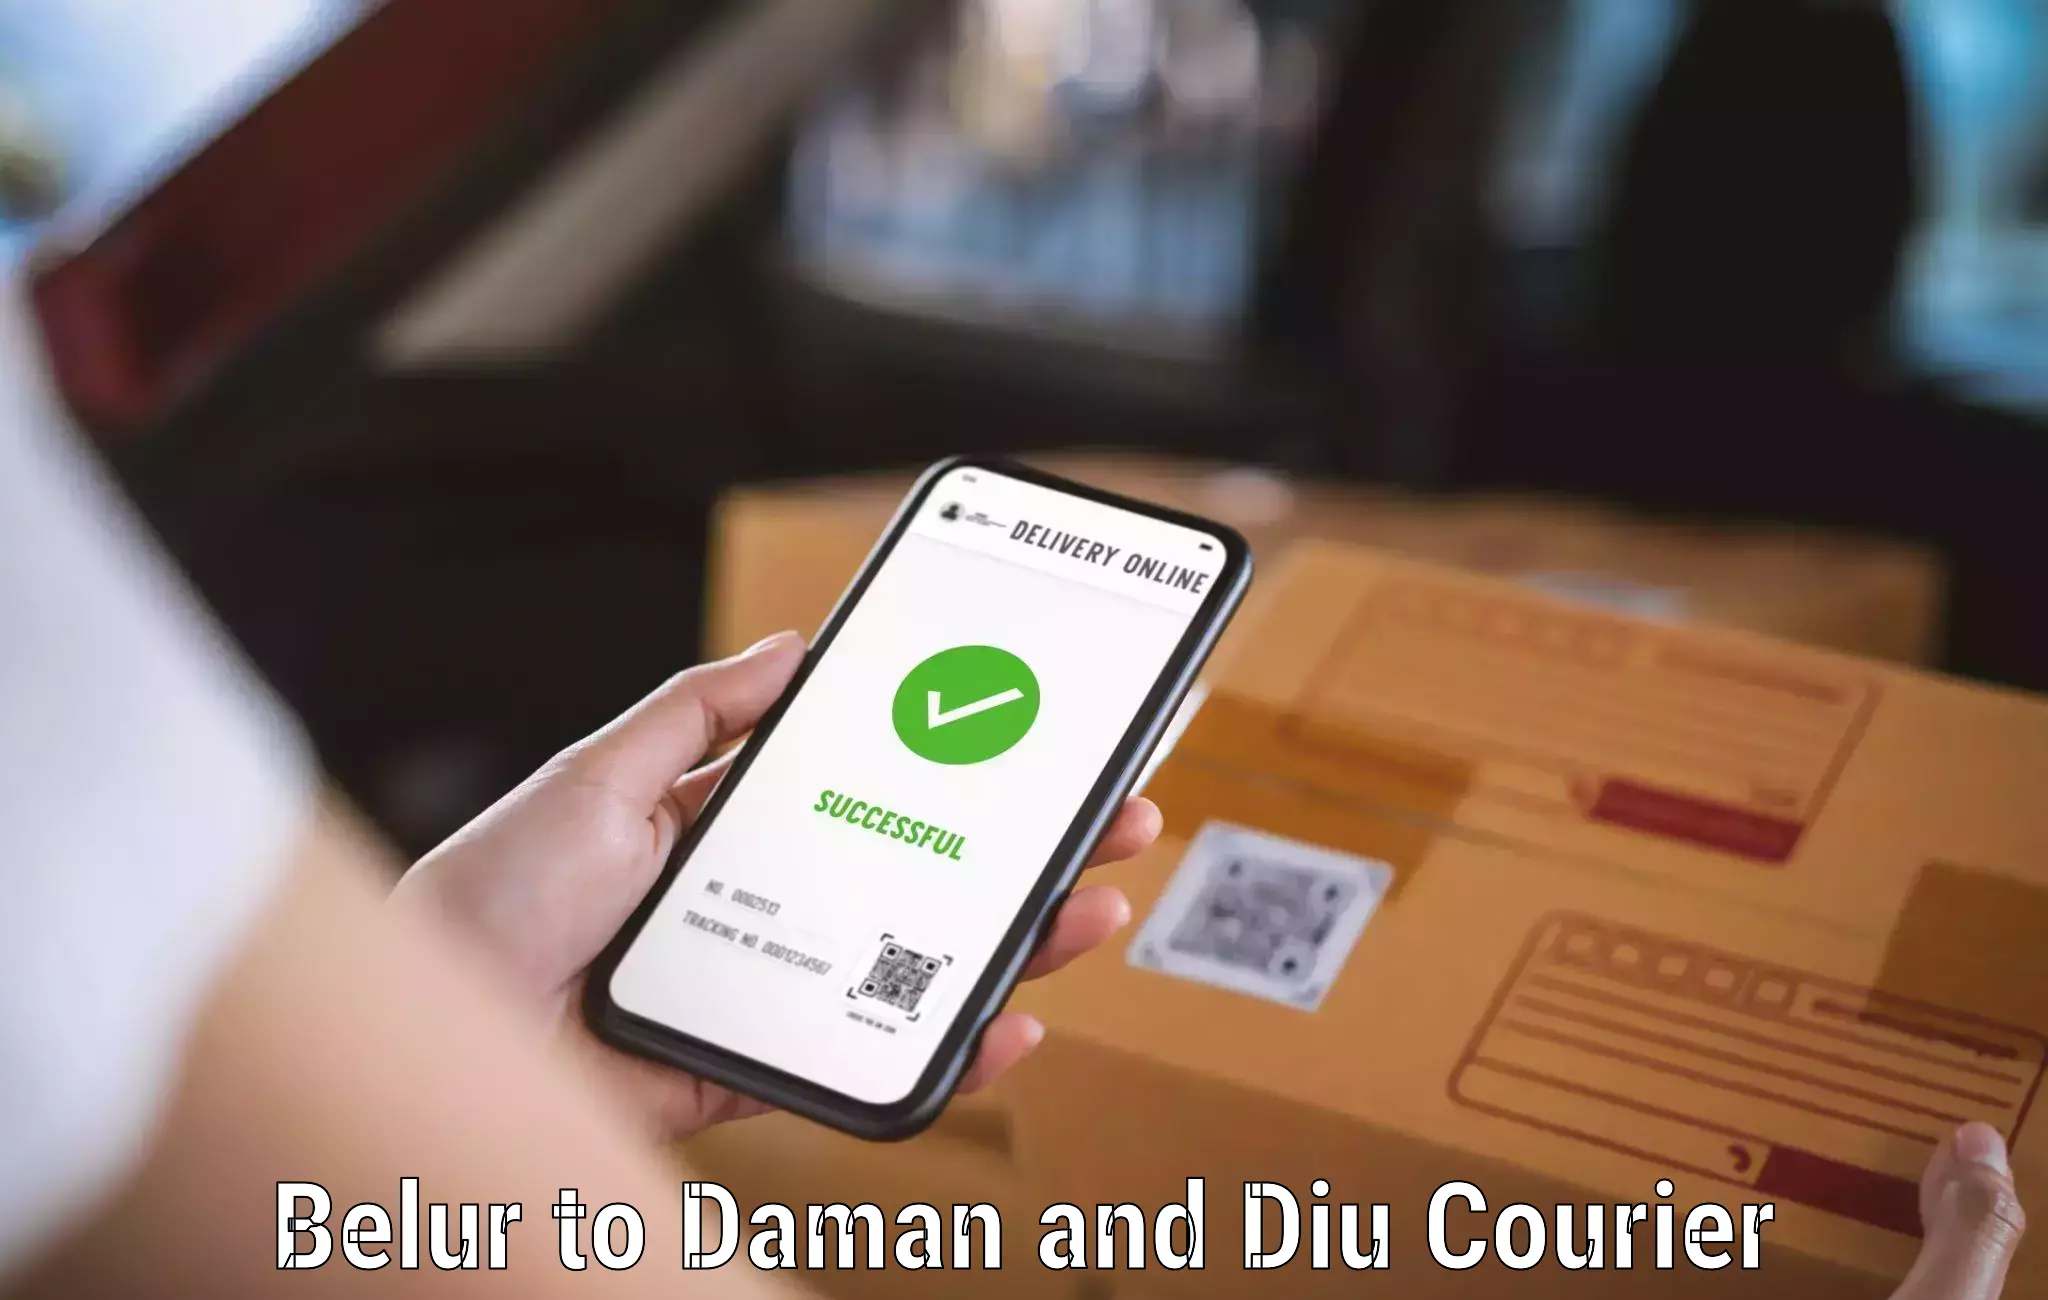 State-of-the-art courier technology in Belur to Daman